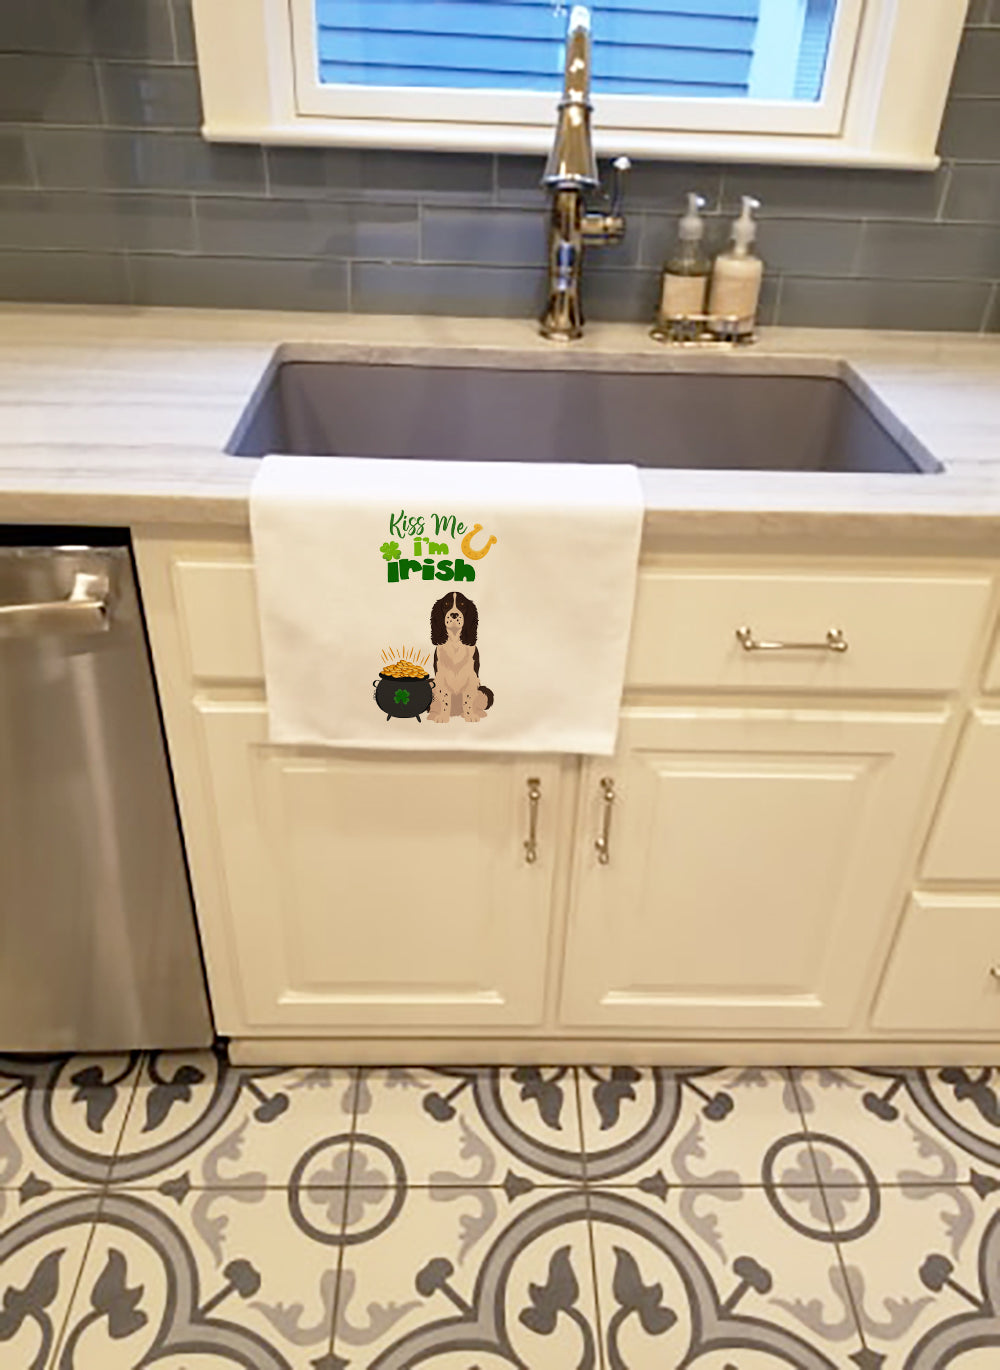 Buy this Liver English Springer Spaniel St. Patrick's Day White Kitchen Towel Set of 2 Dish Towels